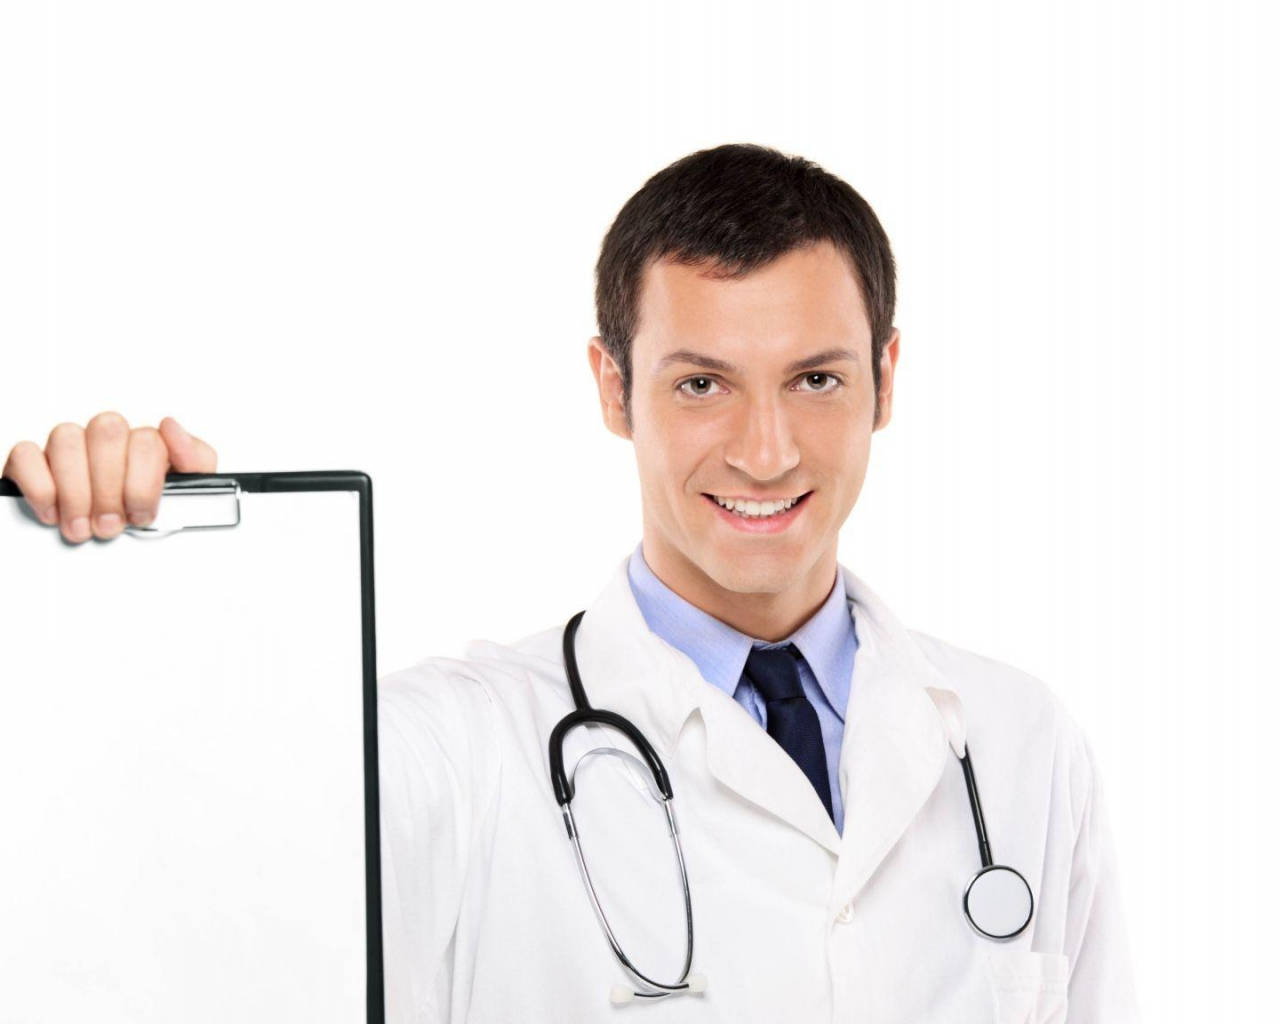 Physician Doctor Smiling Photograph Wallpaper